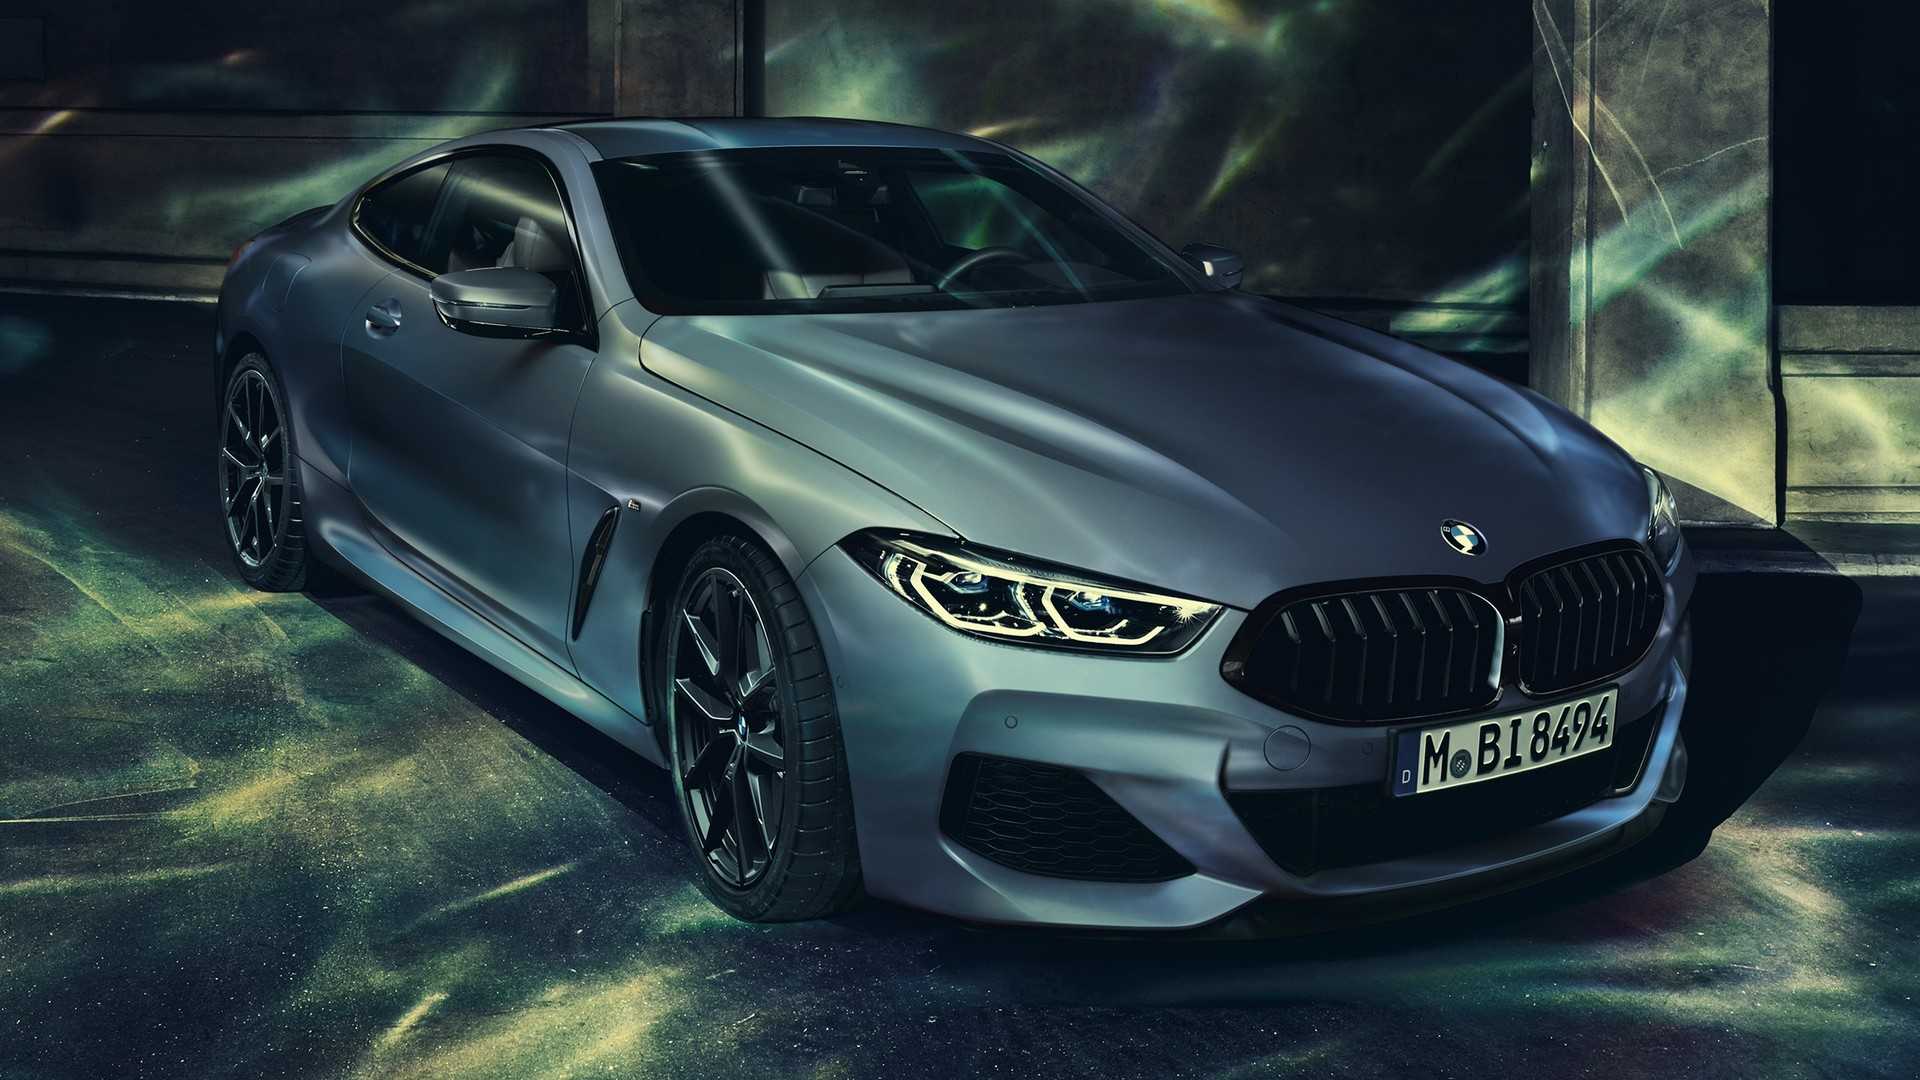 2019 BMW M850i Coupe 8 Series First Edition Revealed